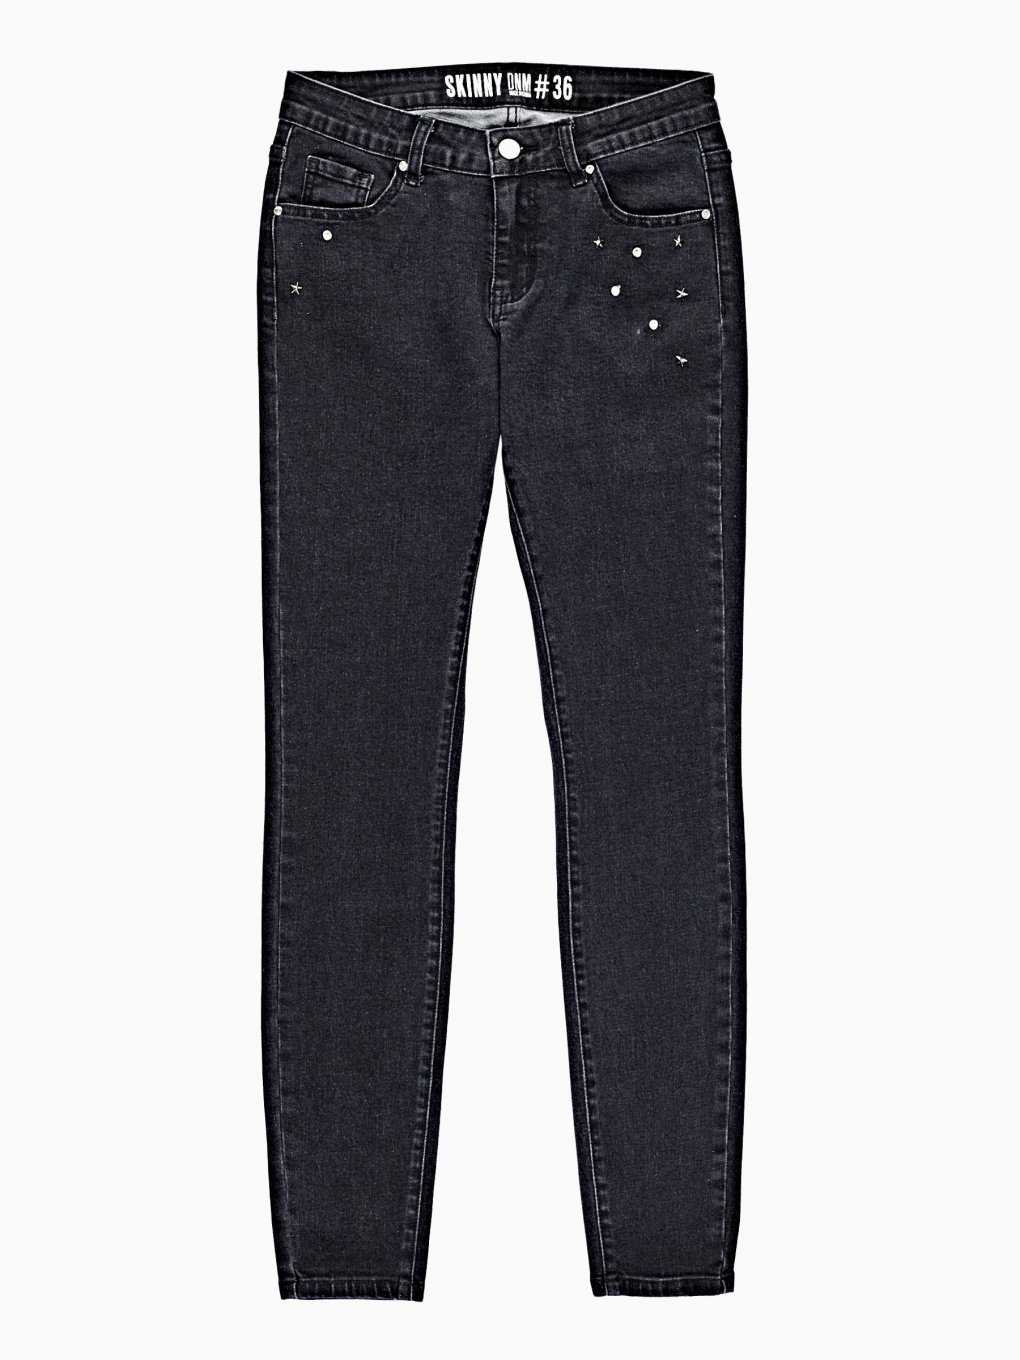 Skinny jeans with studs